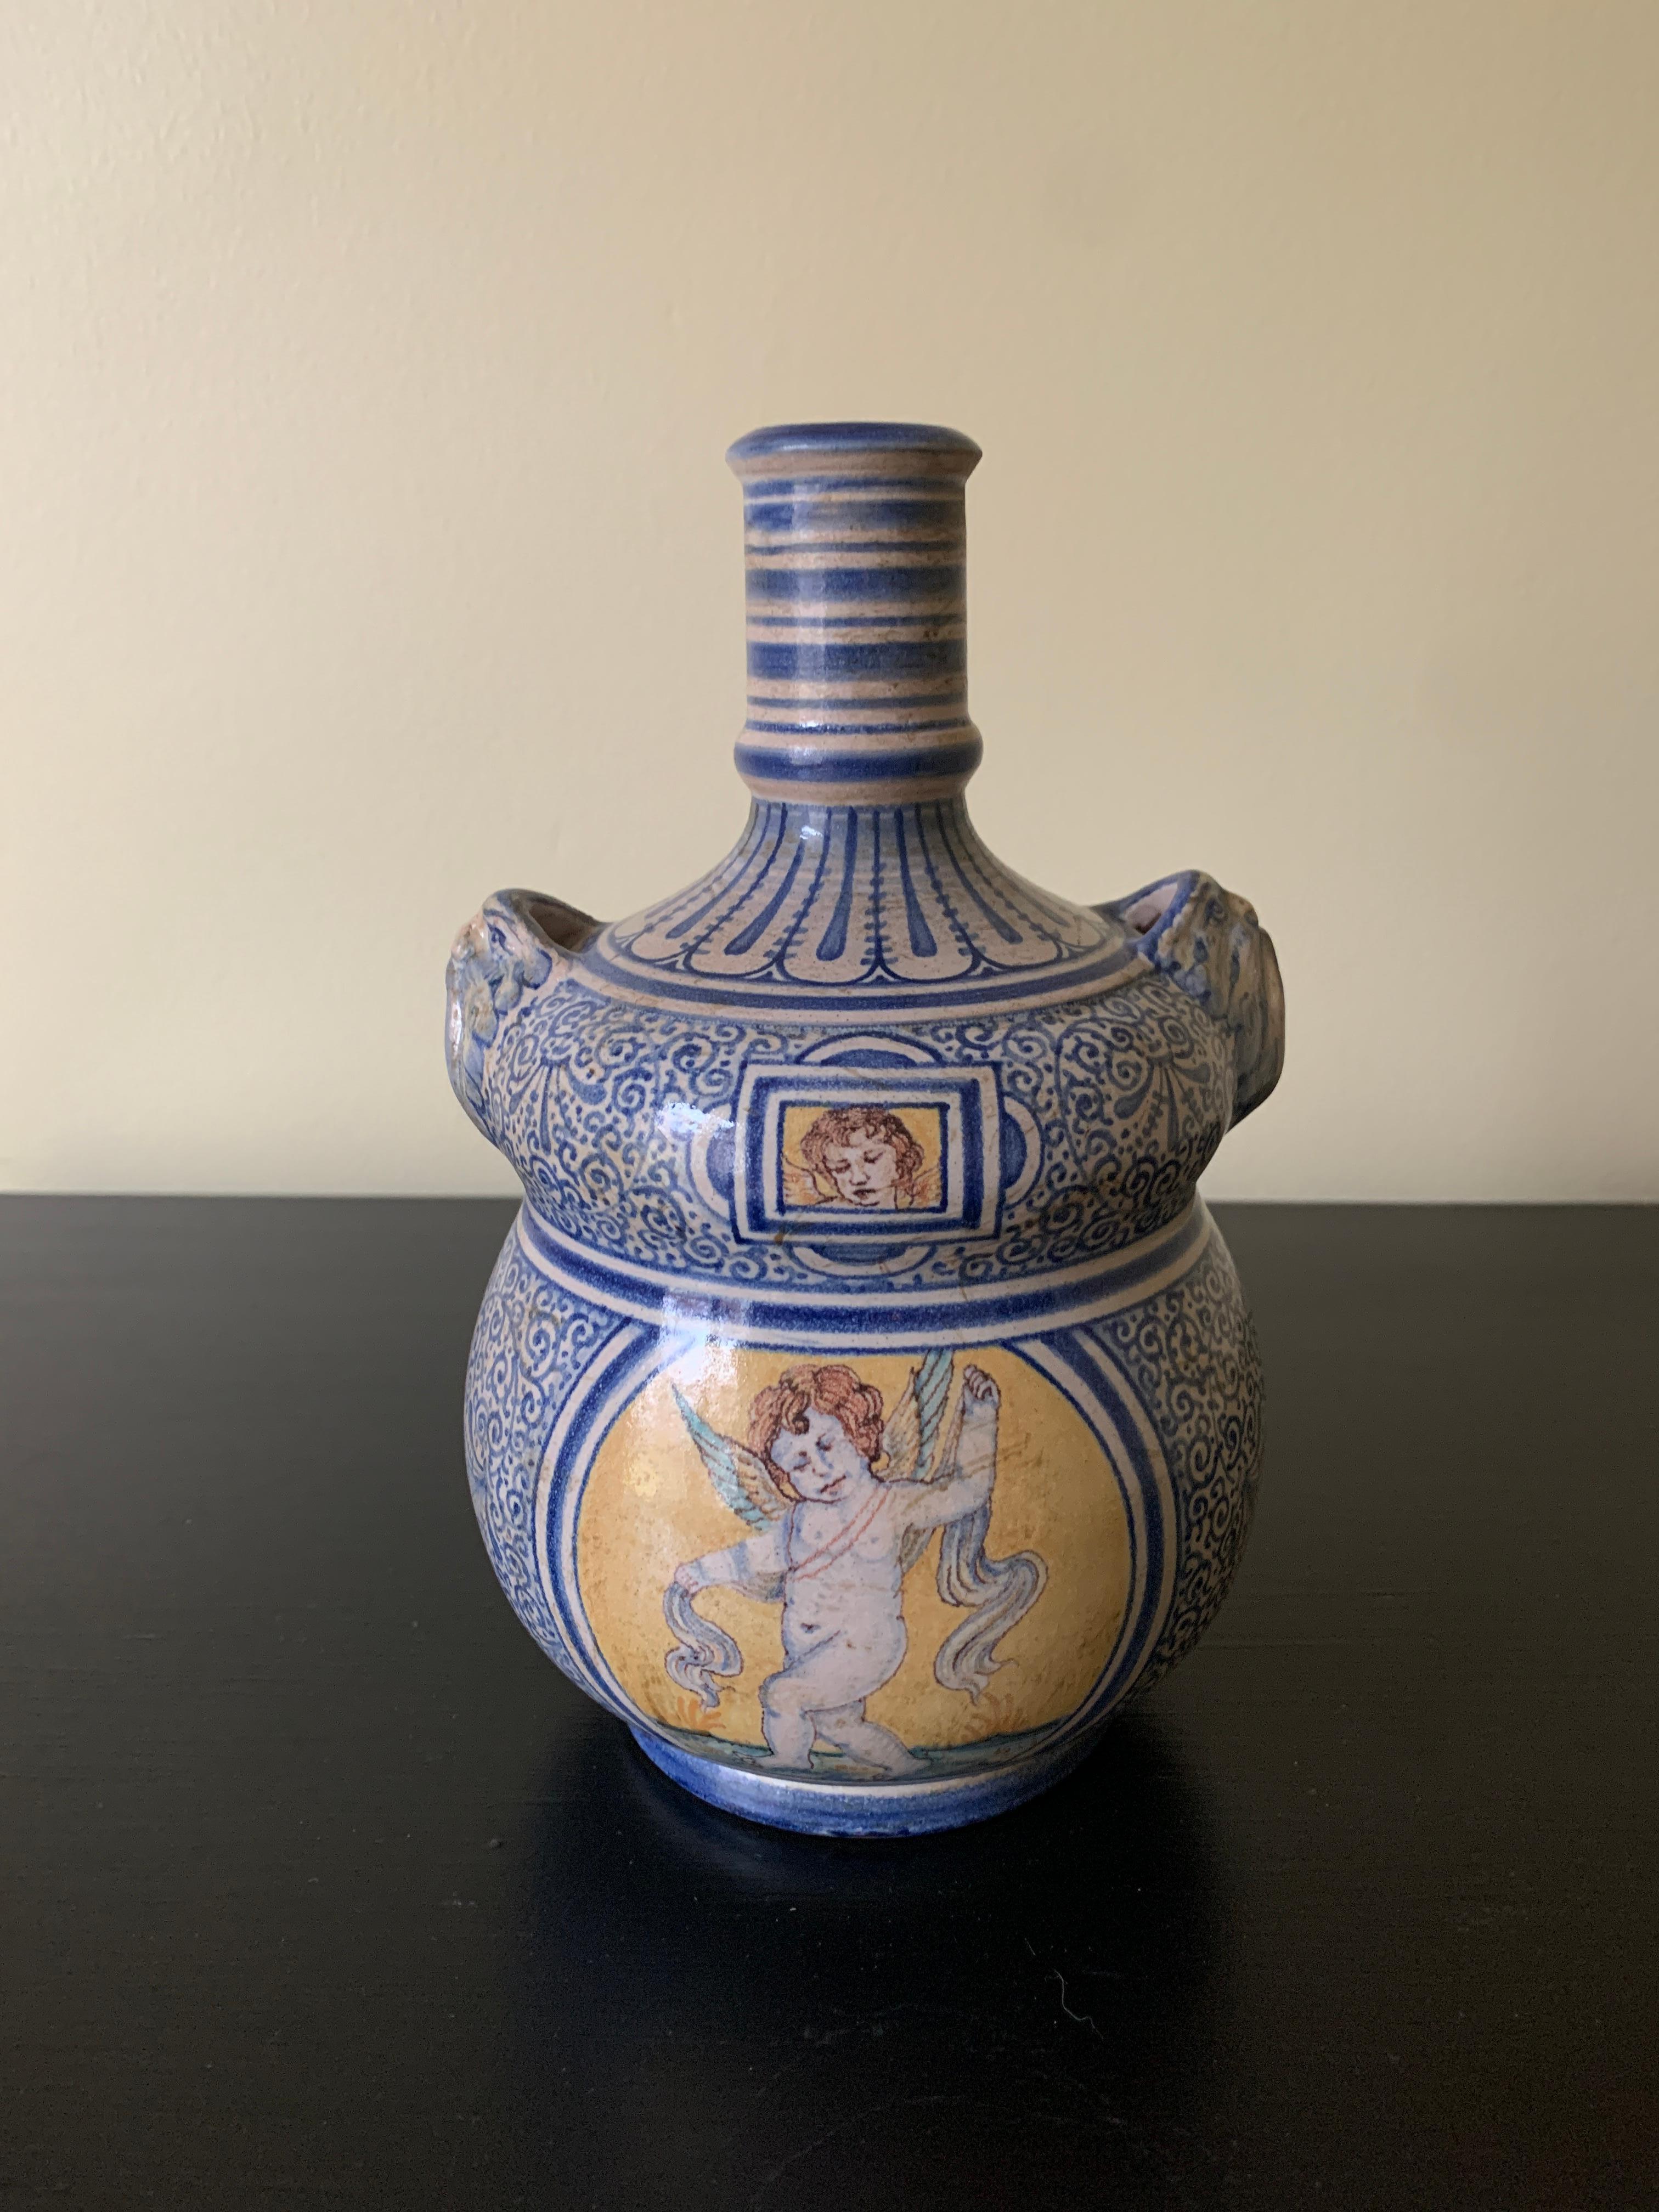 A beautiful hand painted blue, white, and yellow faience pottery jug or vase with handles featuring classical putti 

By Deruta

Italy, Late 20th Century

Measures: 5